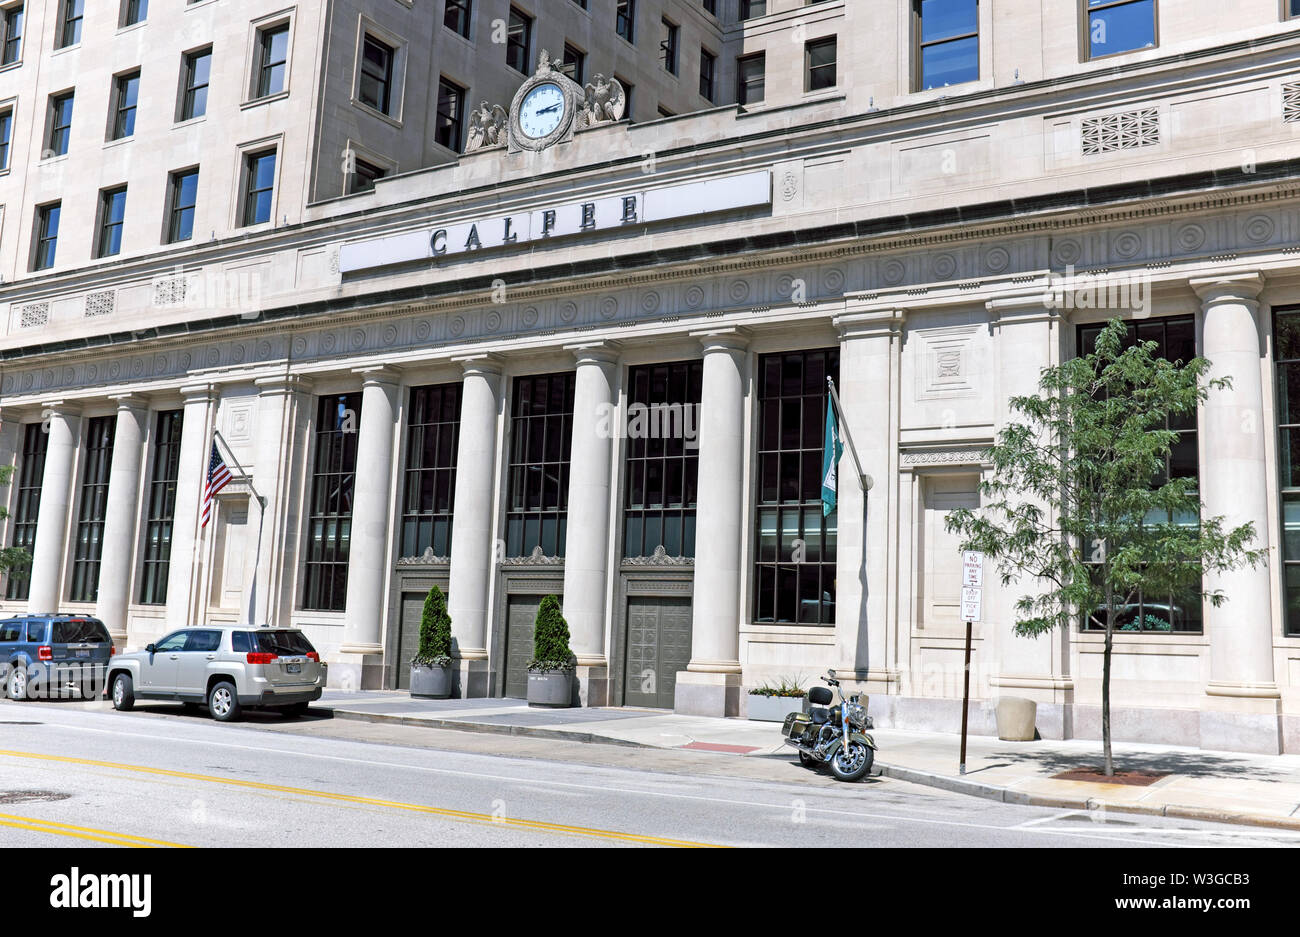 The exterior Beaux Arts facade of the historic Calfee Building on E. 6th in downtown Cleveland, Ohio, is home to Calfee, Halter and Griswold law firm. Stock Photo